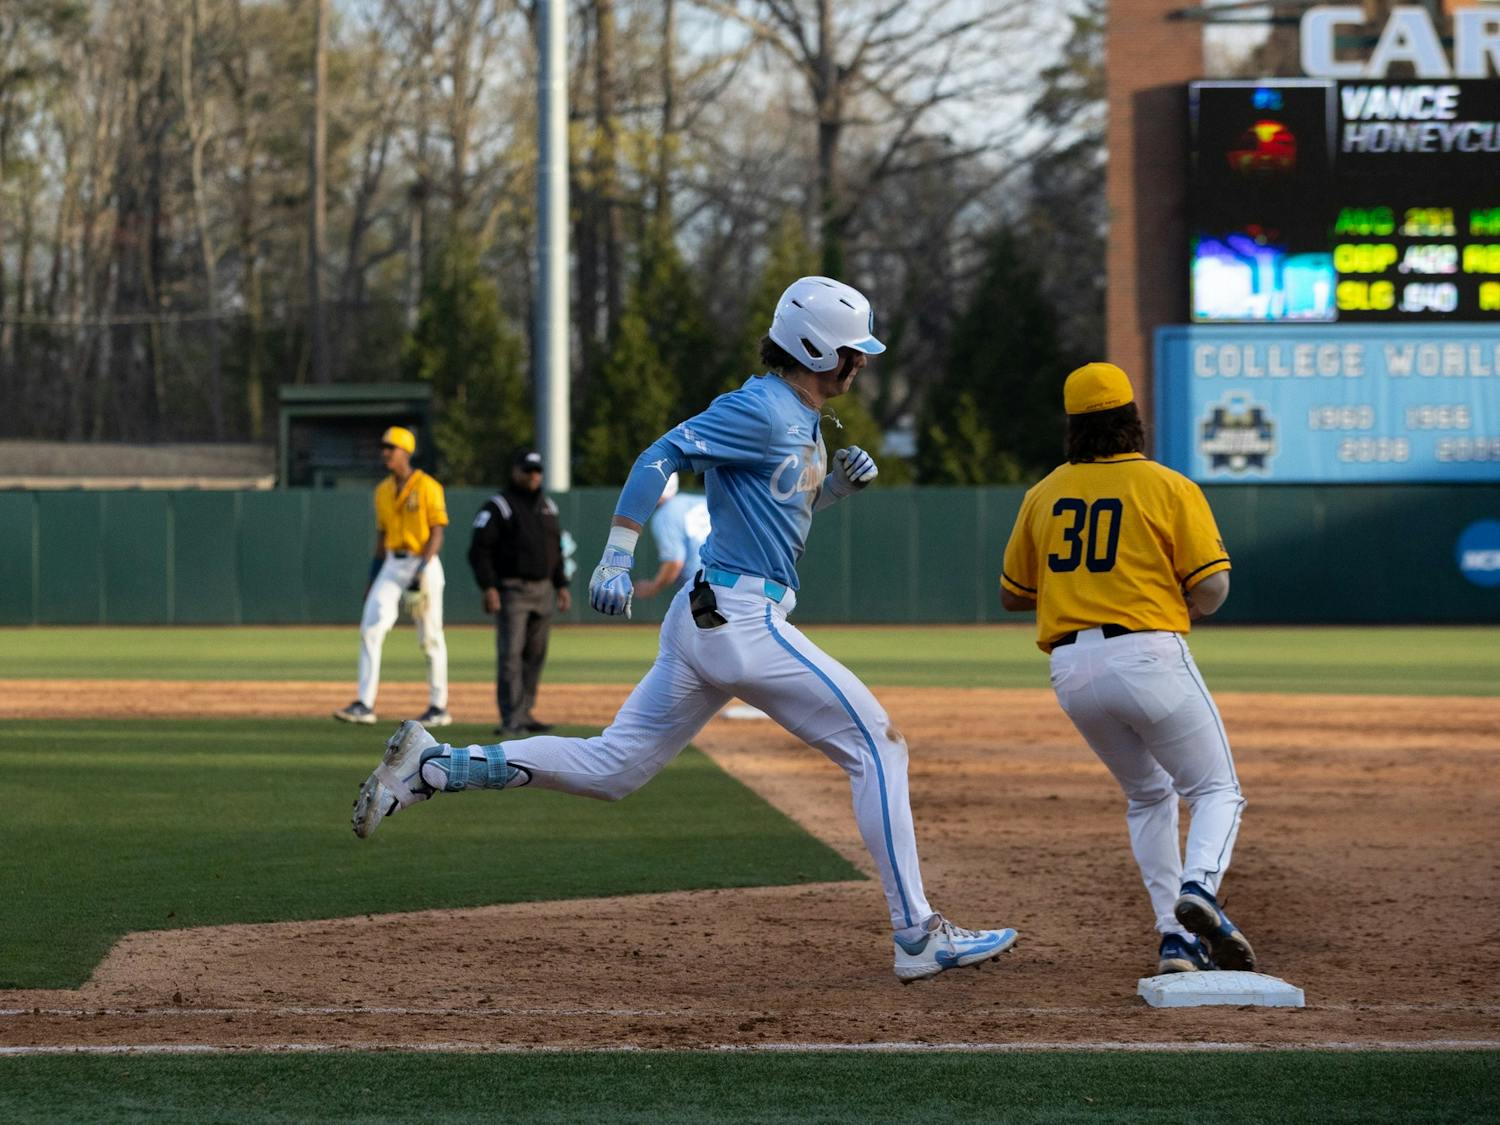 UNC sophomore Vance Honeycutt (7) arrives at first base during the baseball game against North Carolina A&amp;T on Tuesday, March 21, 2023, at Boshamer Stadium. UNC beat North Carolina A&amp;T 6-4.